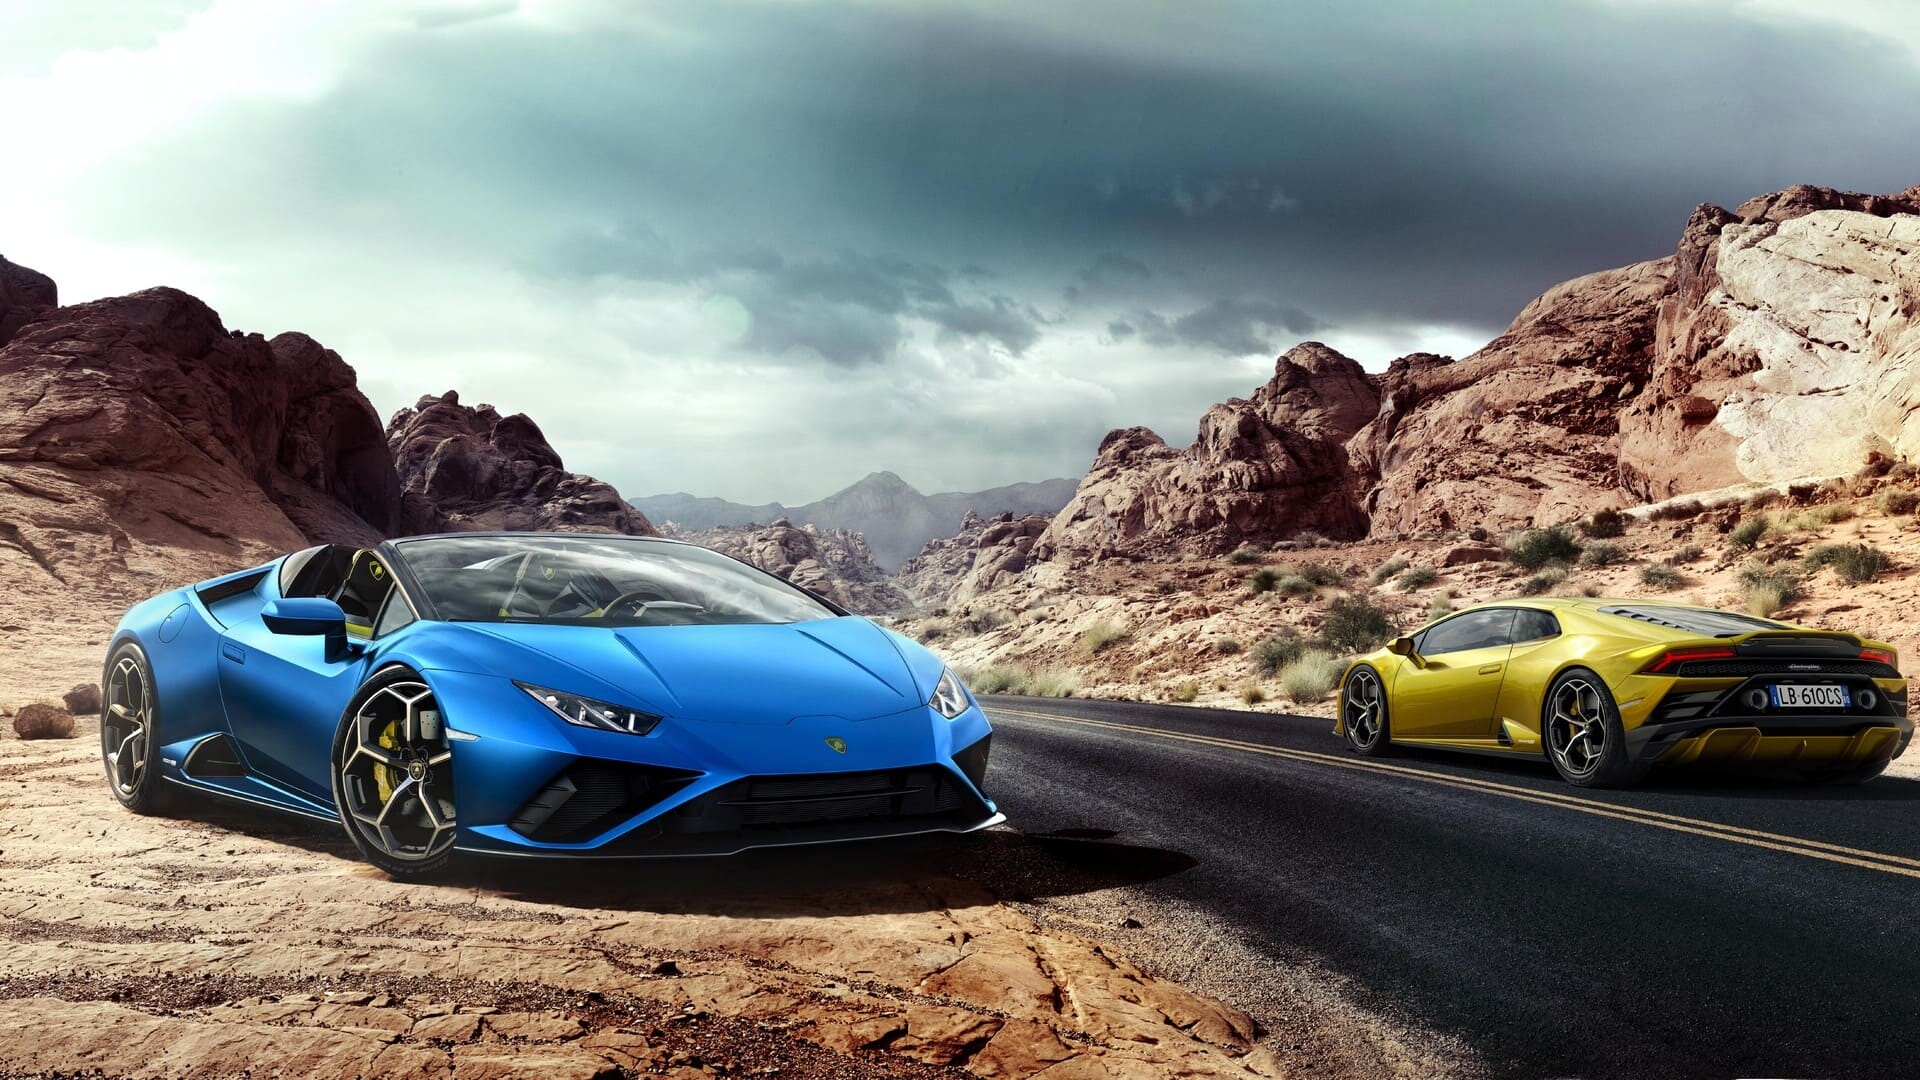 Lamborghini: The company produces the V12-powered Aventador and the V10-powered Huracan. 1920x1080 Full HD Background.